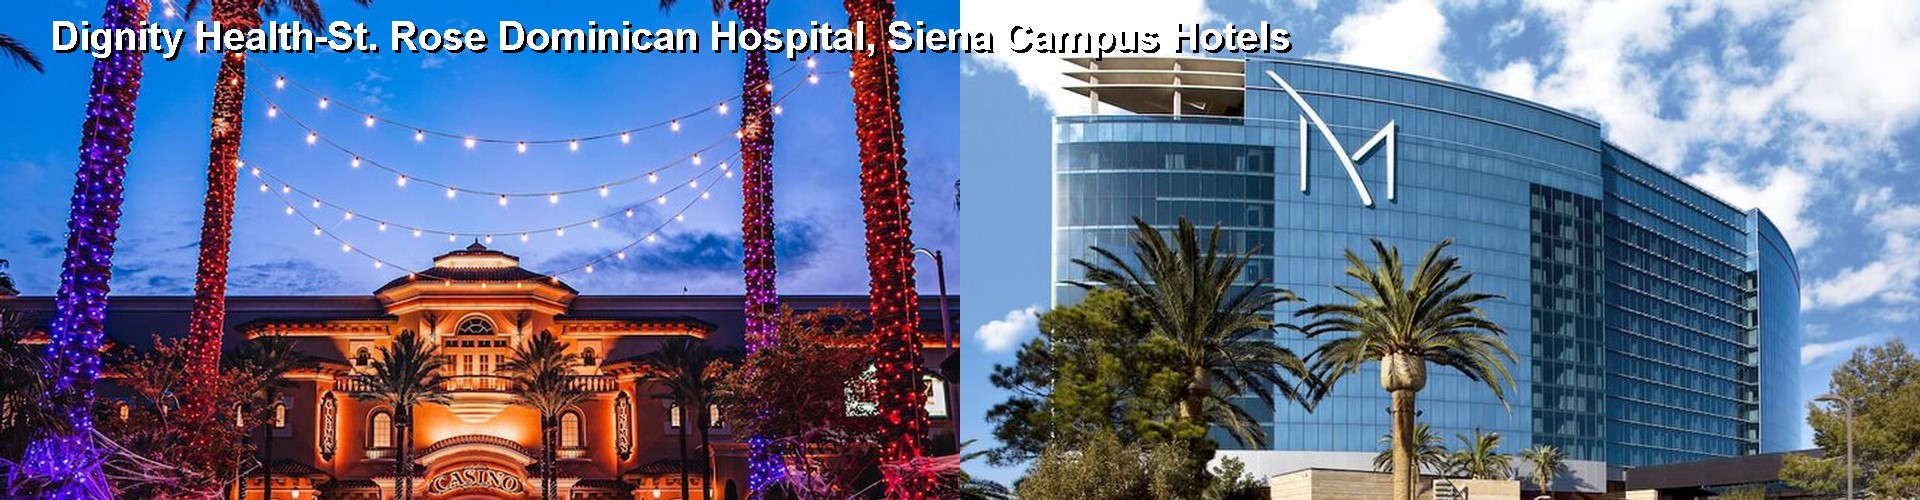 5 Best Hotels near Dignity Health-St. Rose Dominican Hospital, Siena Campus